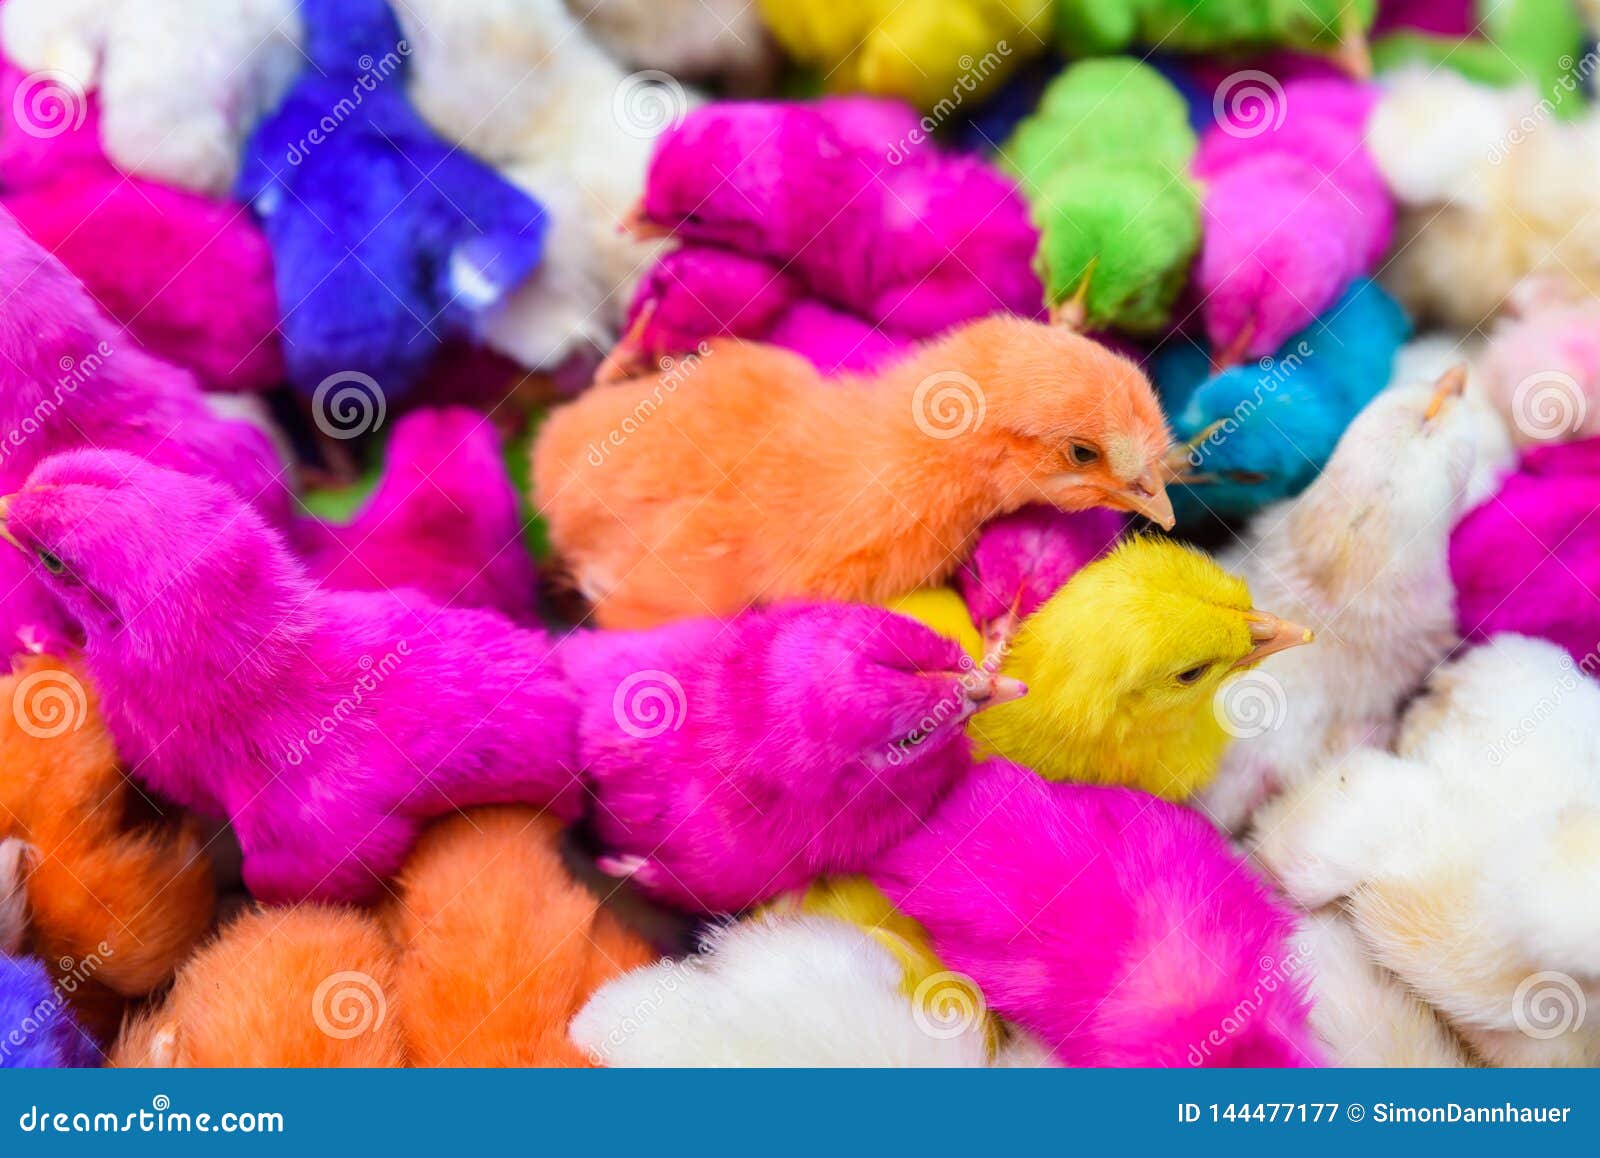 Featured image of post Colorful Chickens Amazing Photos - Affordable and search from millions of royalty free images, photos and vectors.